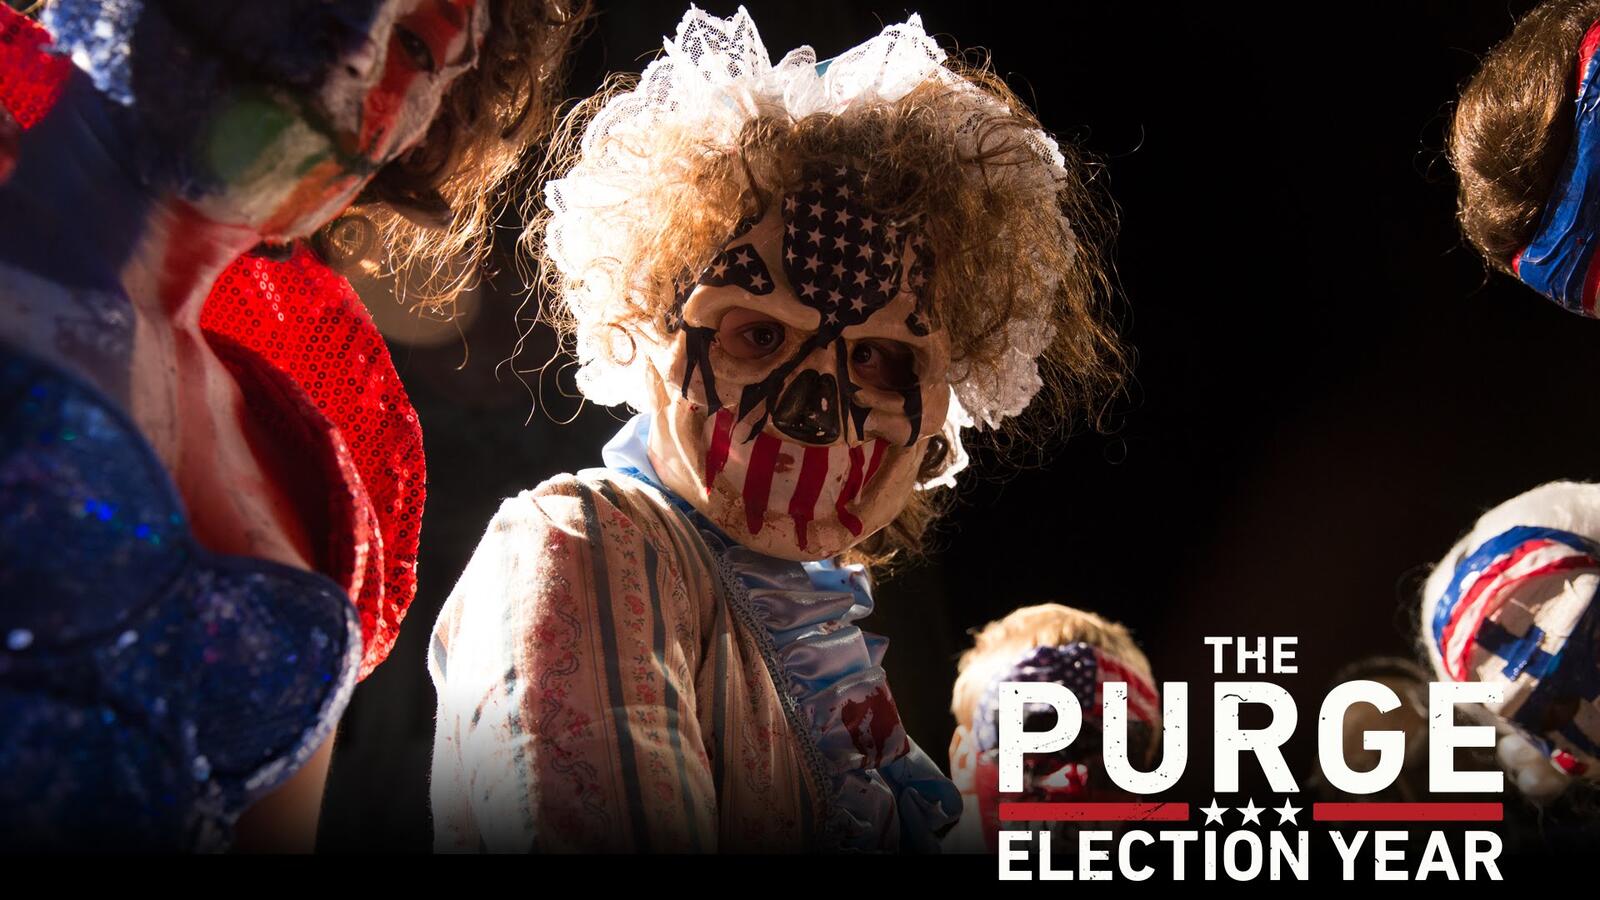 Wallpapers the purge election year 2016 movies movies on the desktop